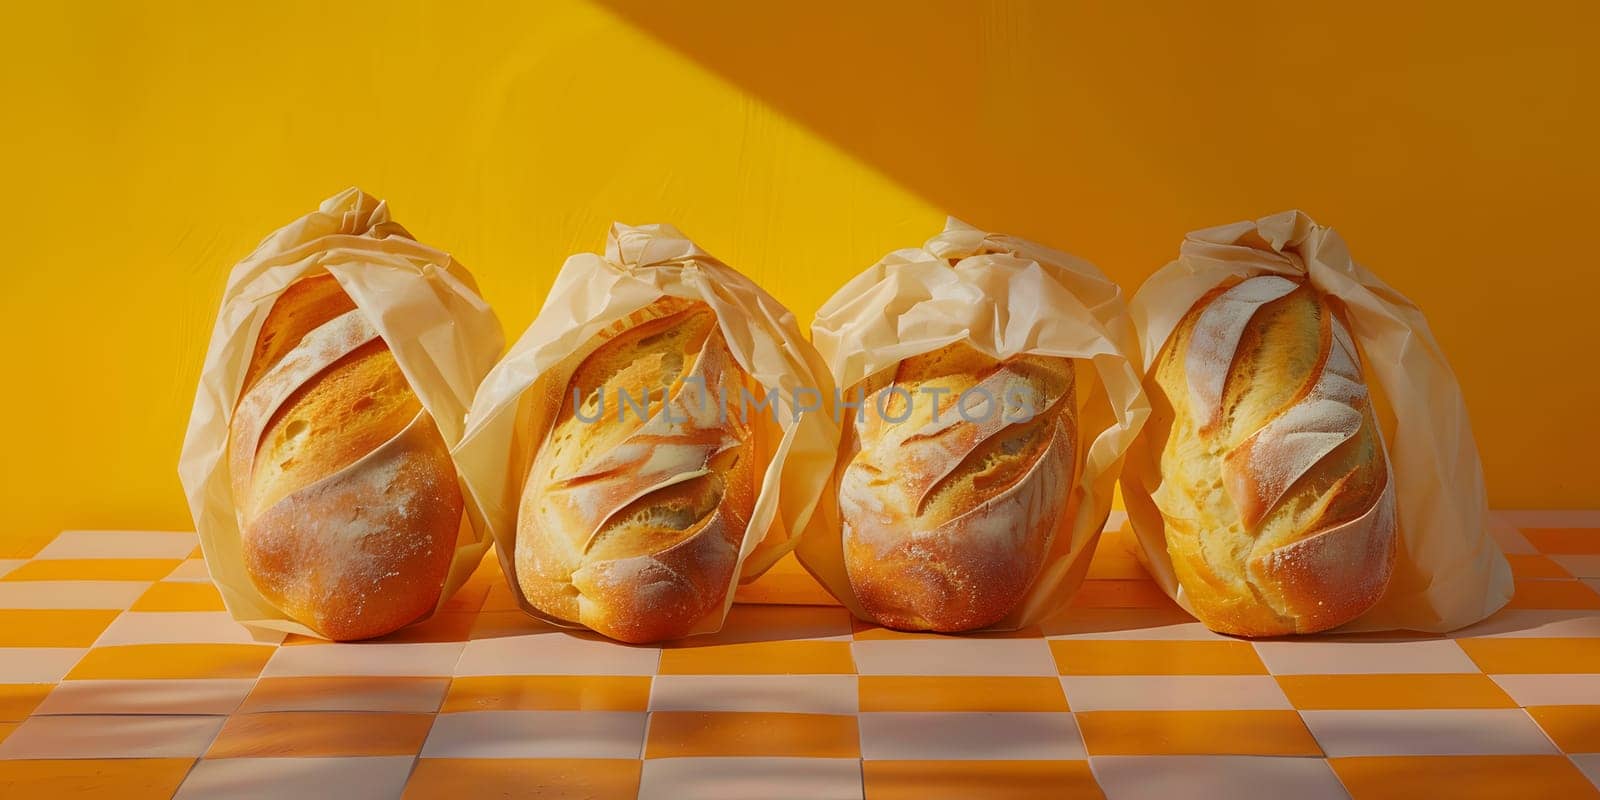 Four loaves of bread, a staple food, are displayed on a checkered tablecloth. The baked goods can be used as an ingredient in various dishes and recipes, and are a popular food item in many cuisines